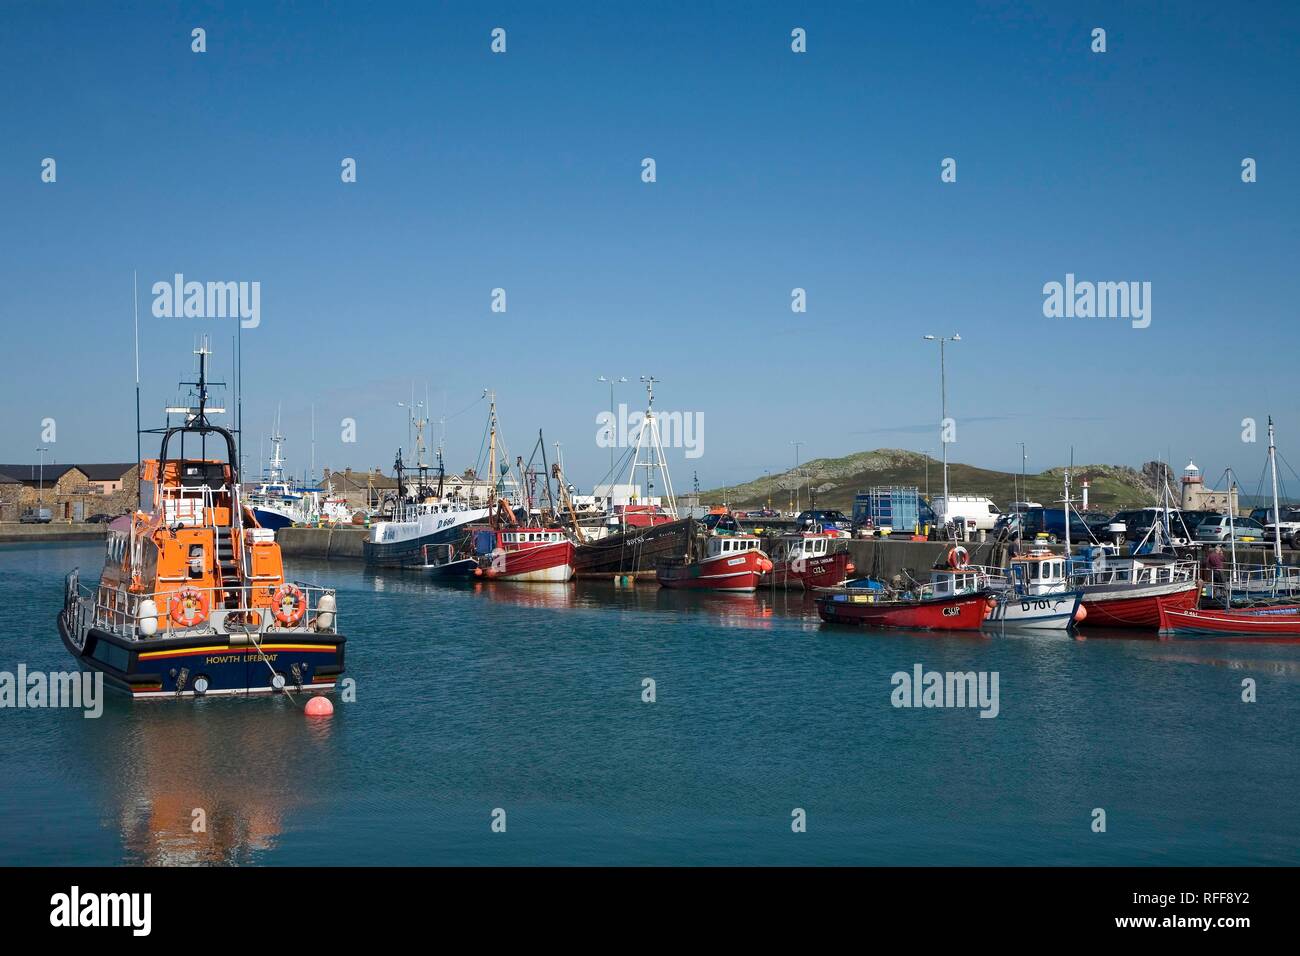 Boats in the harbour of Howth on the peninsula Howth Head, Ireland Stock Photo